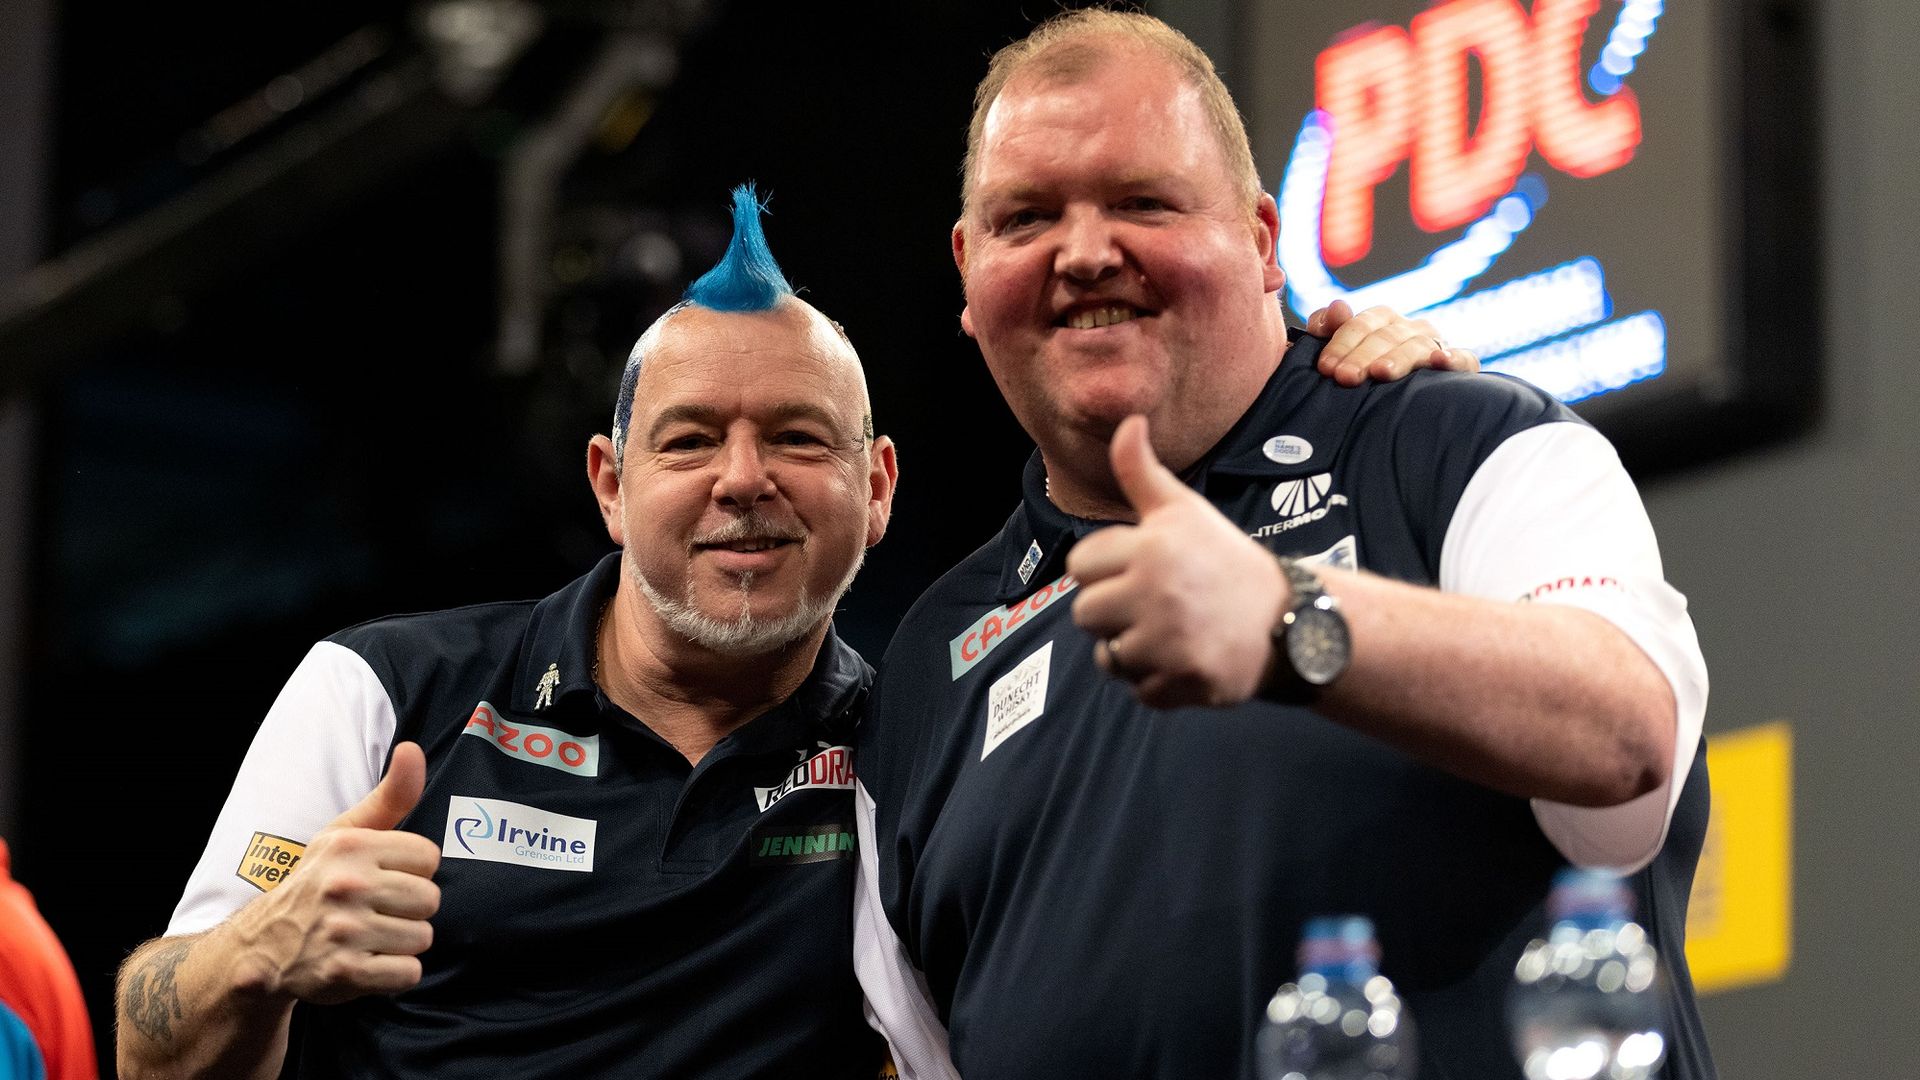 Scotland and England ease by way of in World Cup of DartsSkySports | Information